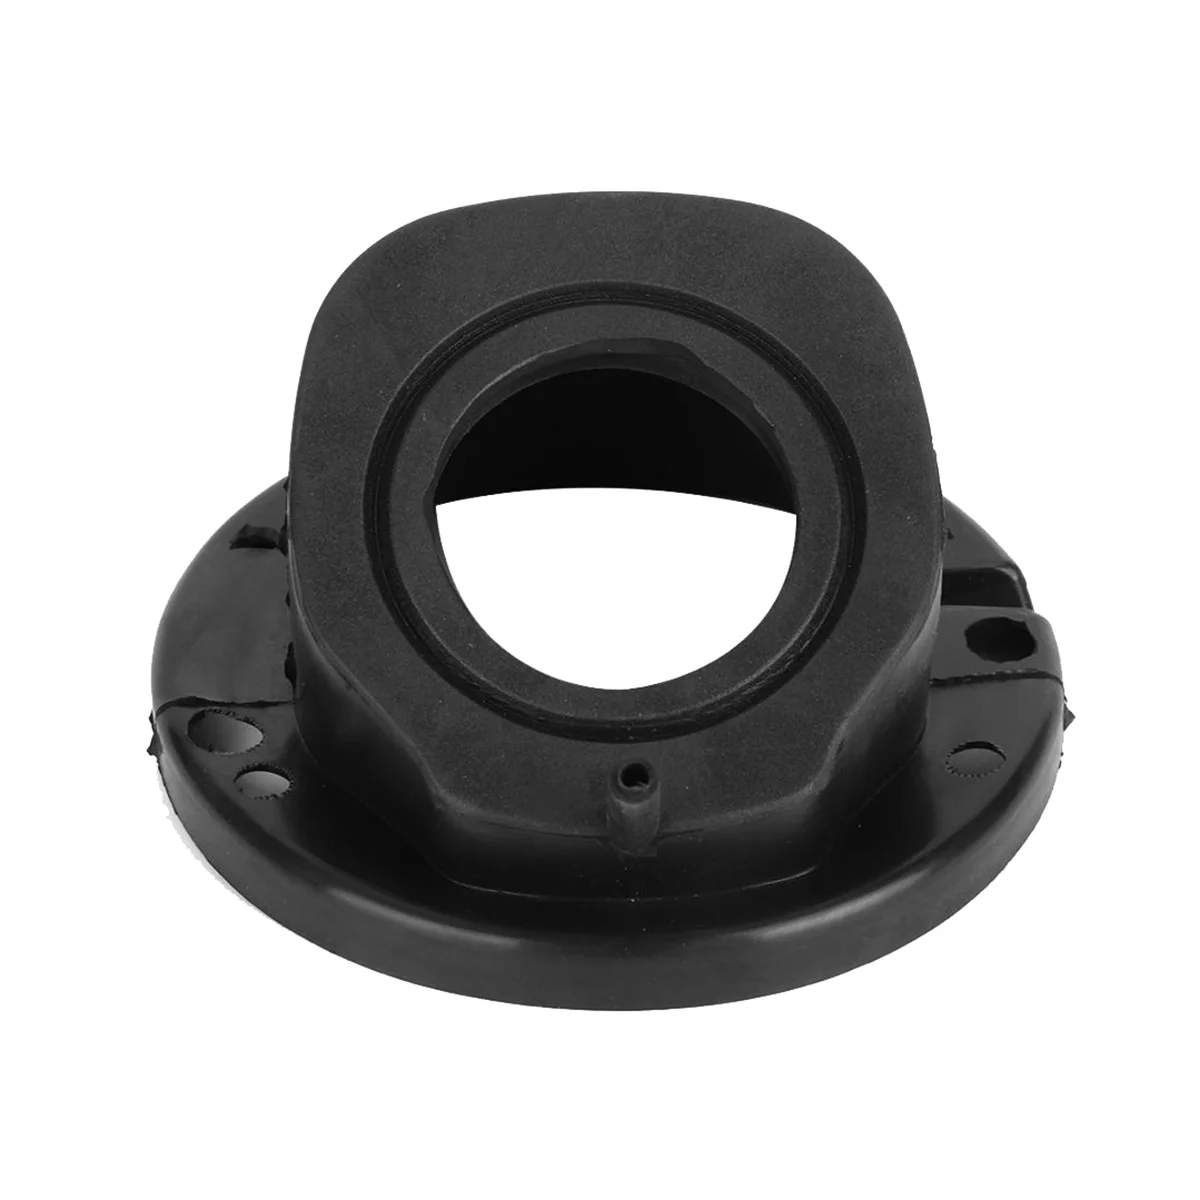 

Fuel Flap Rubber Insert Q0000251V012 for Benz Smart Fortwo & Roadster Car Accessory Oil Tank Cover Insert